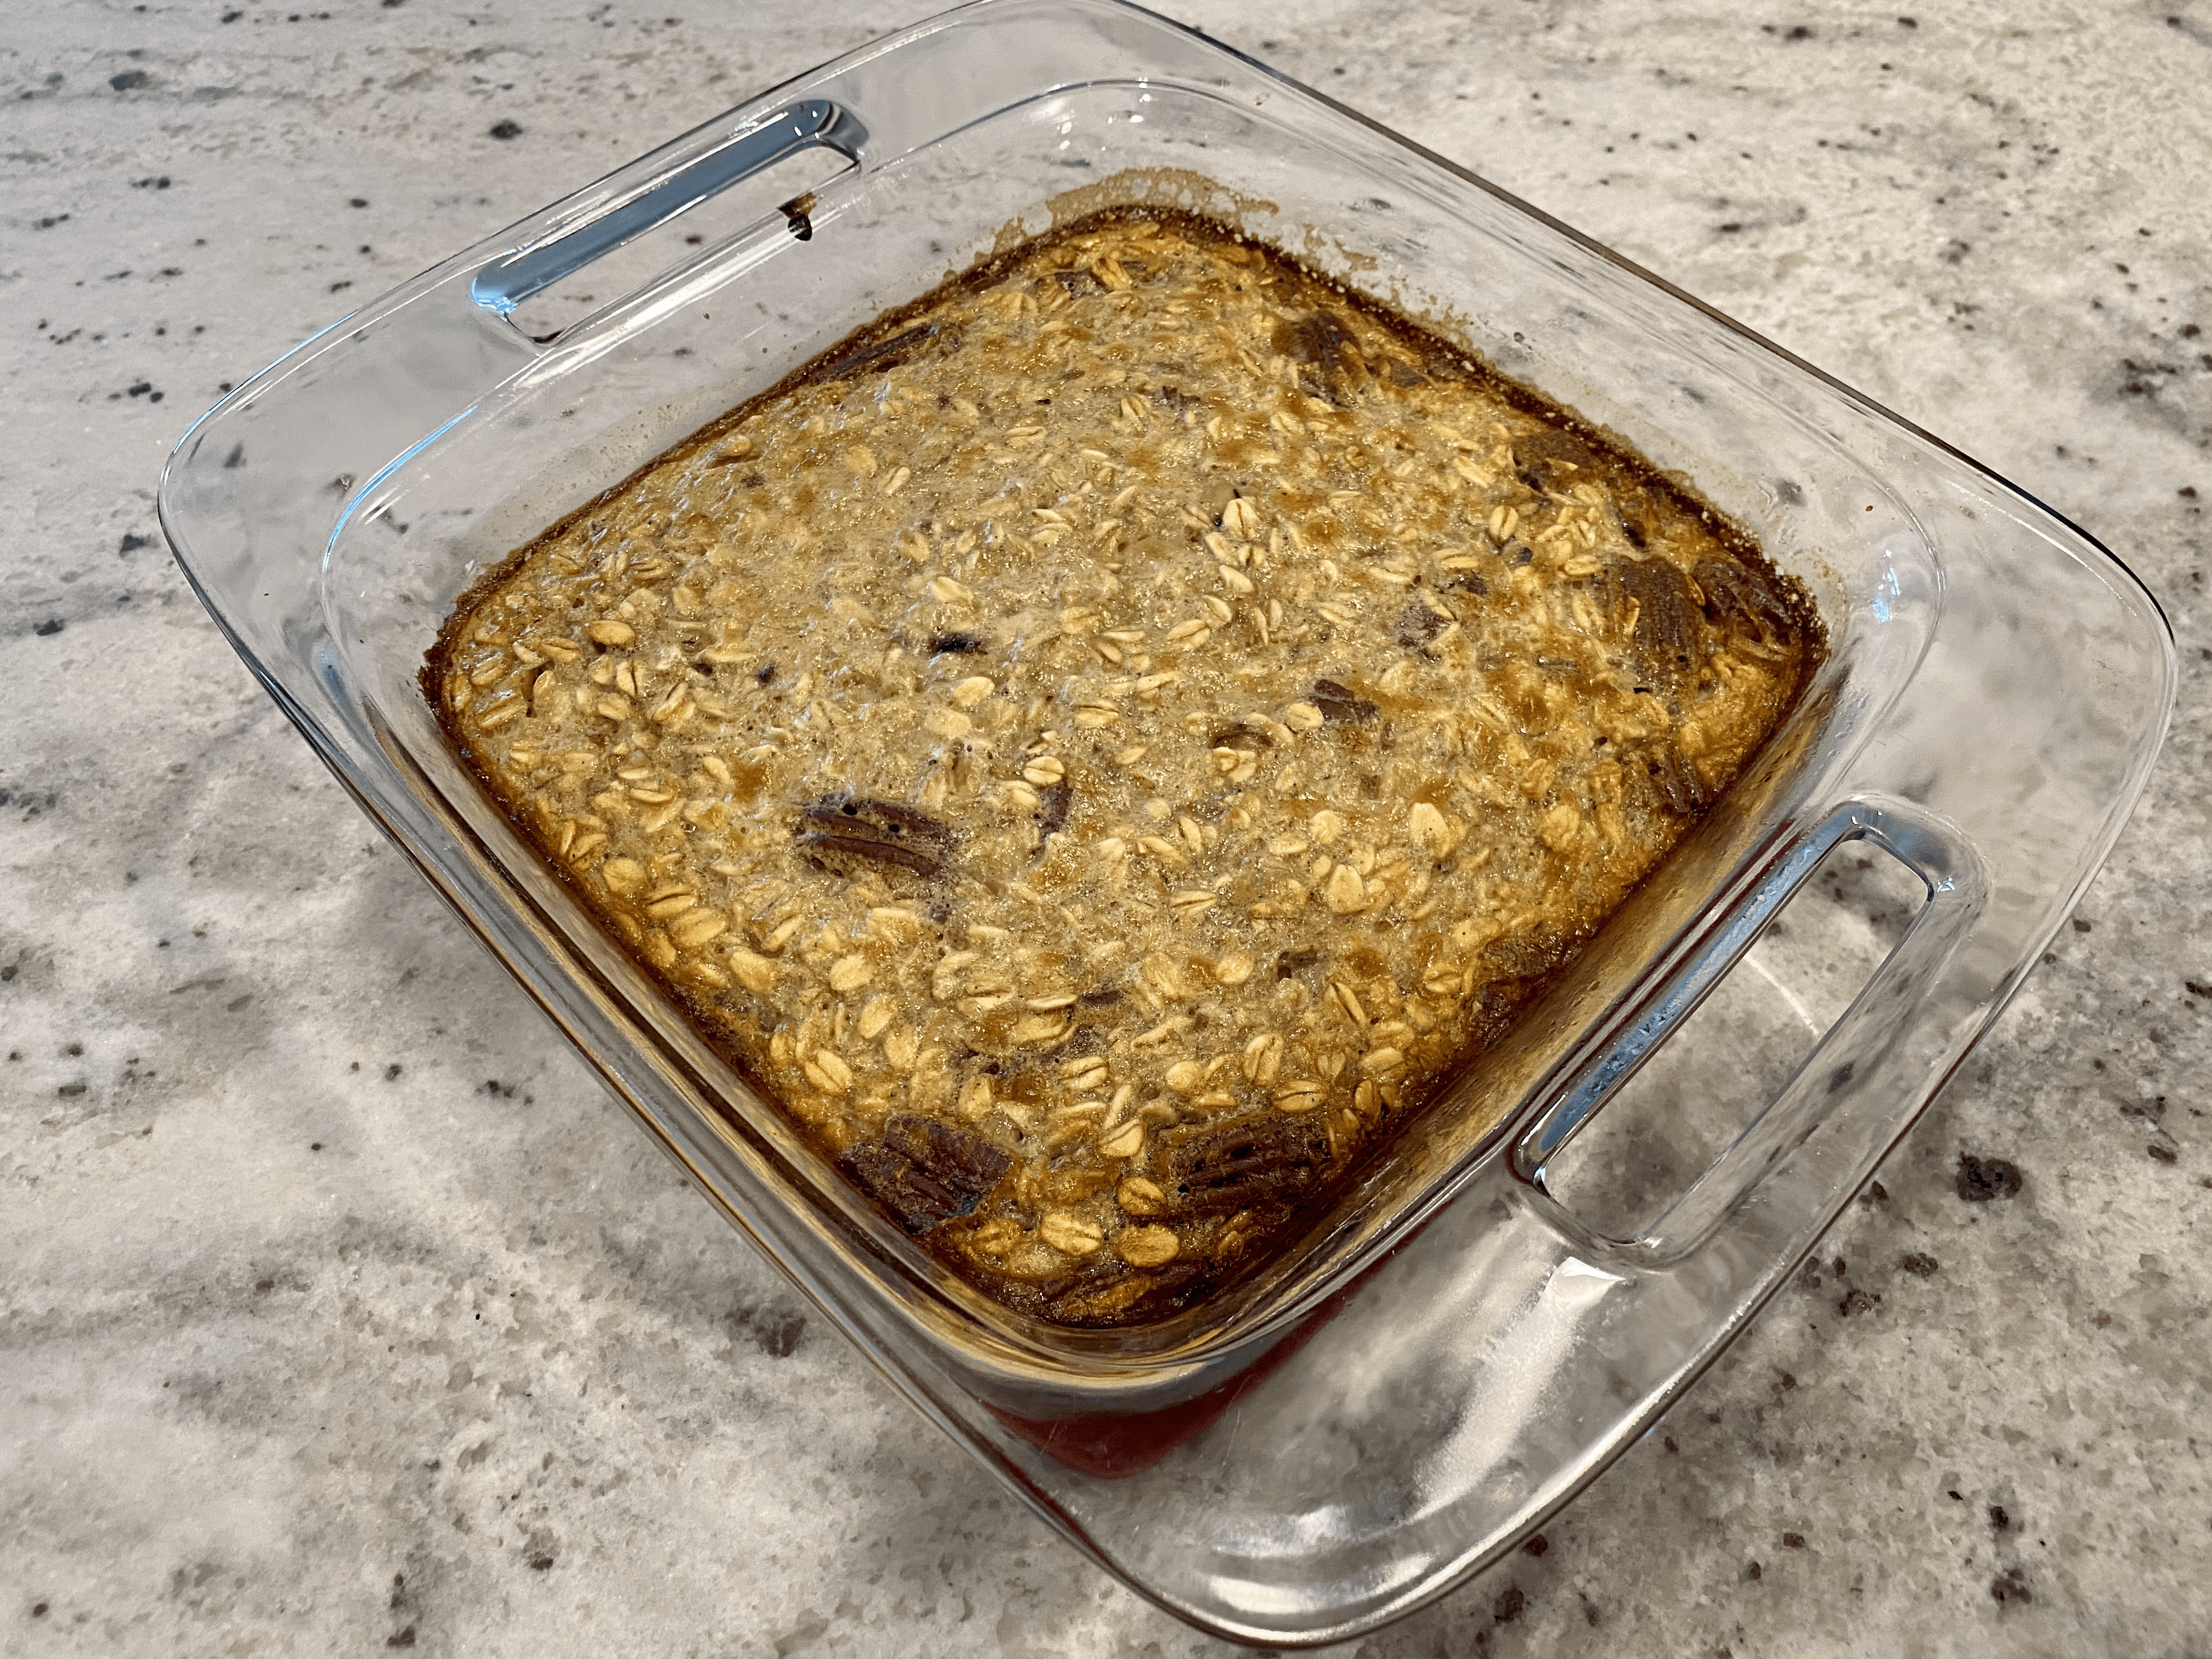 Baked Banana Bread Oatmeal in a Glass Dish on a Marble Countertop